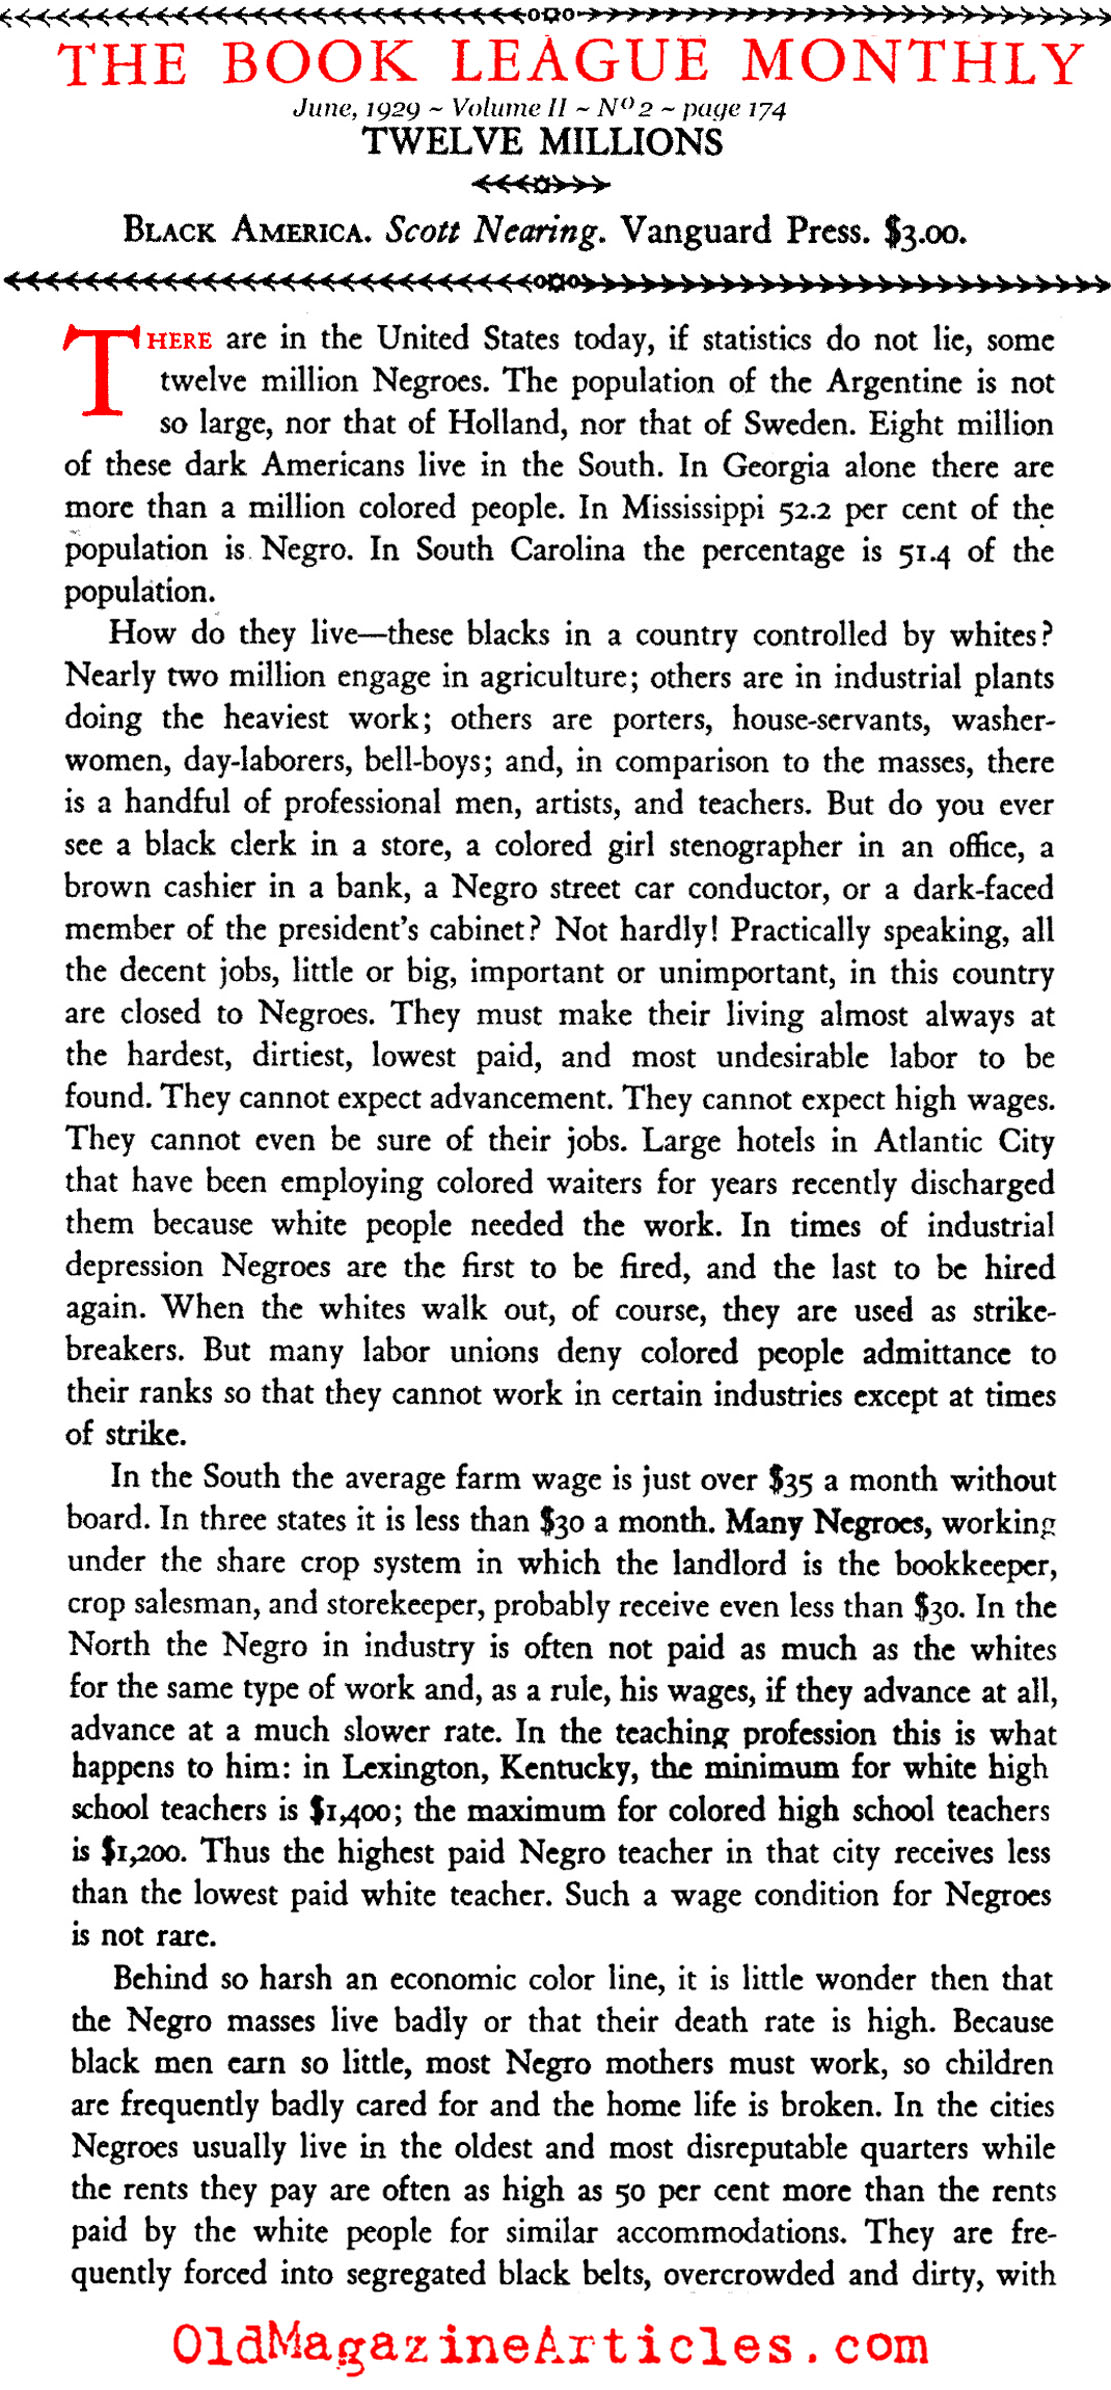 The State of African-Americans in 1929 (The Book League, 1929)